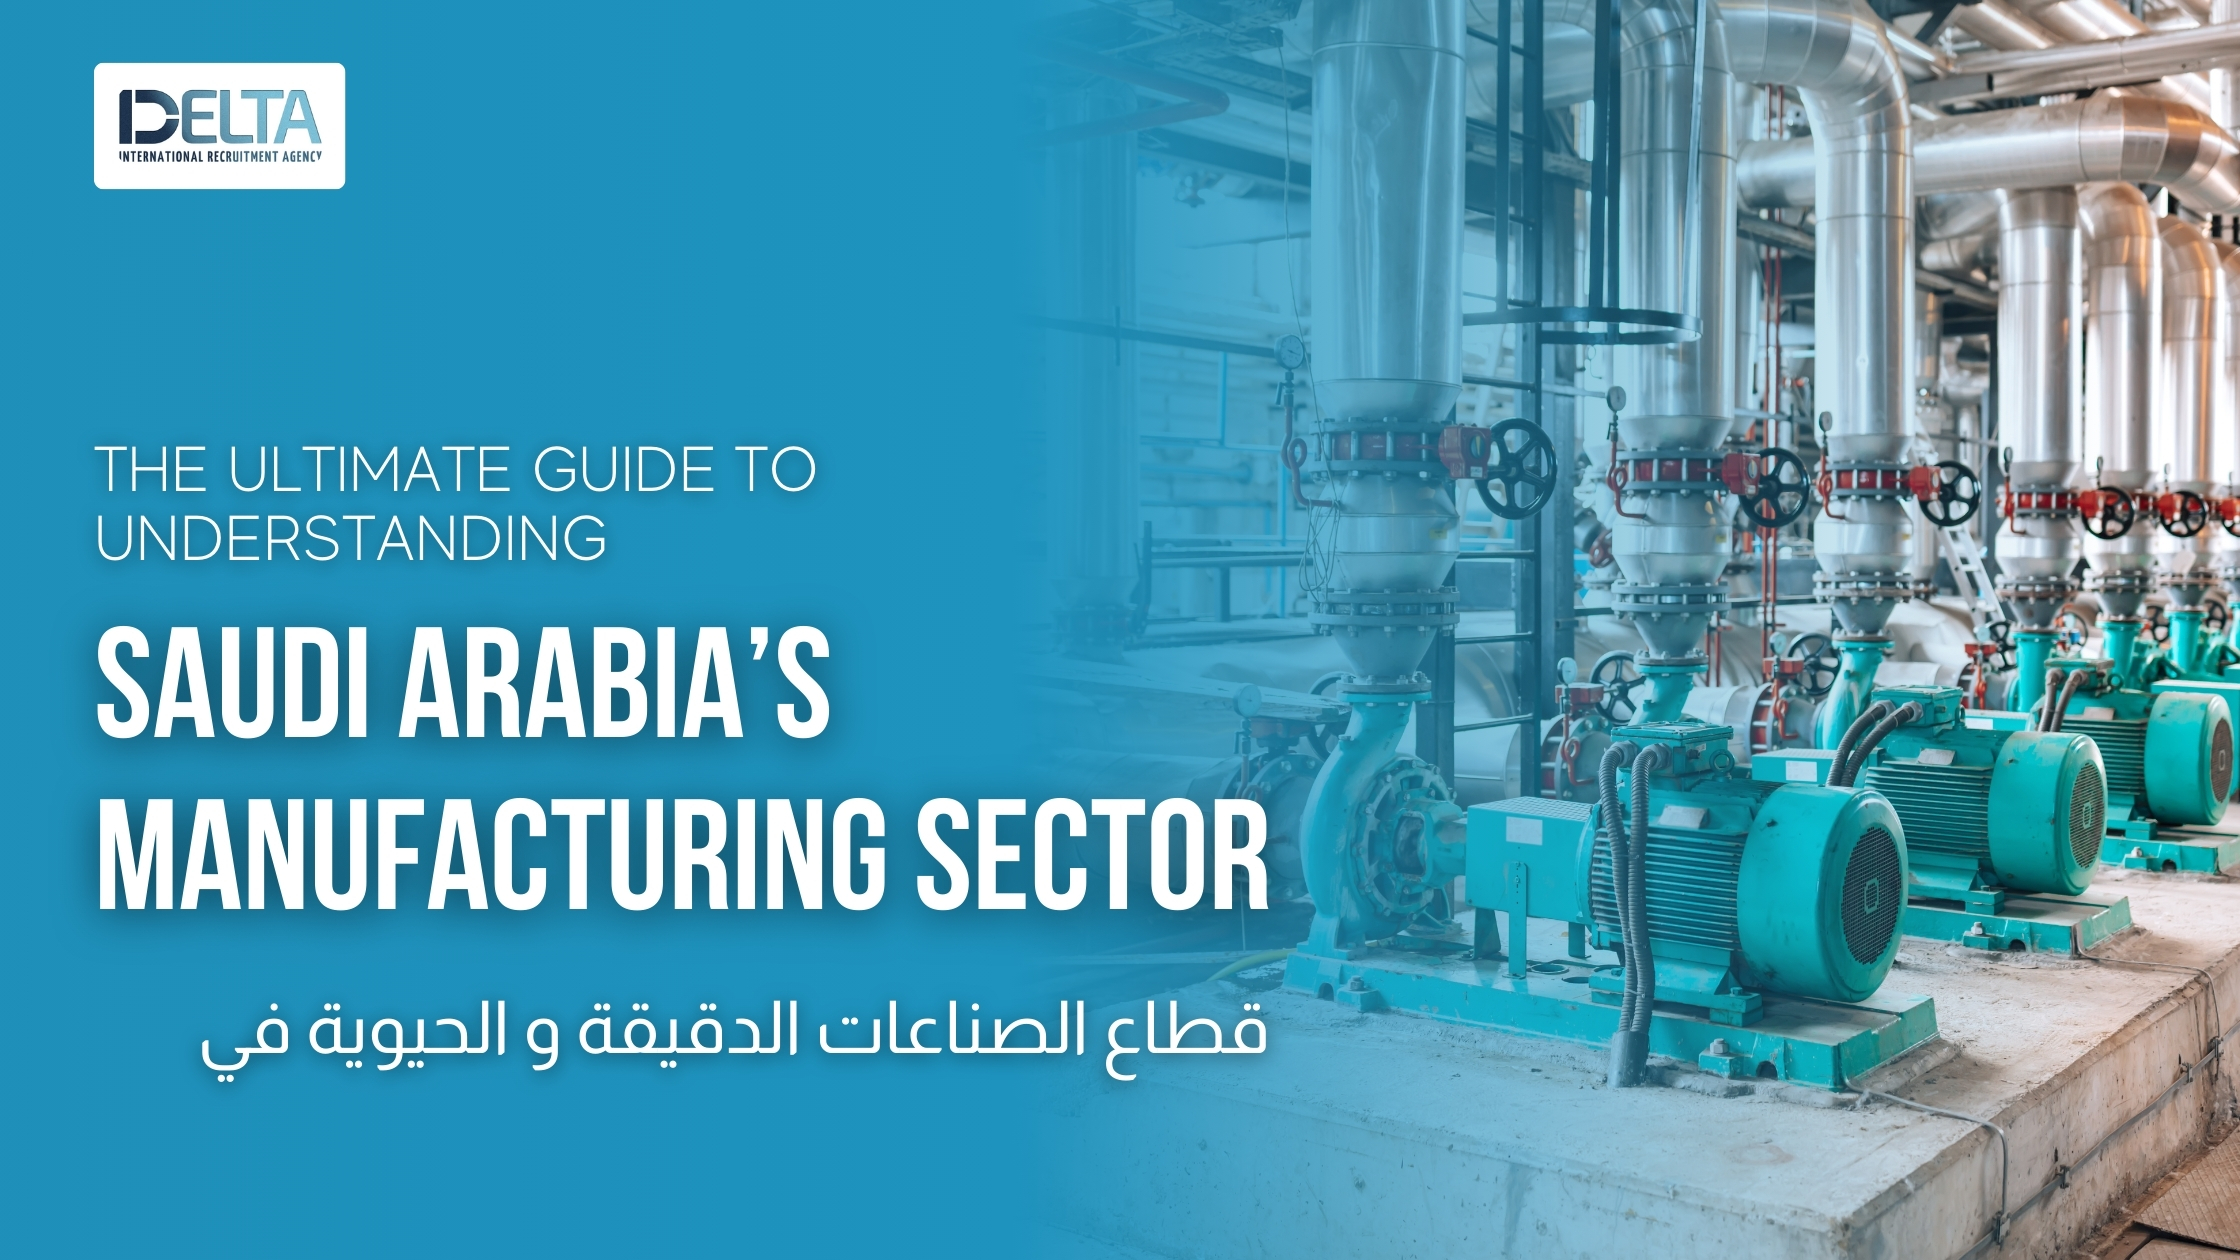 The Ultimate Guide to Understanding Saudi Arabia’s Manufacturing Sector